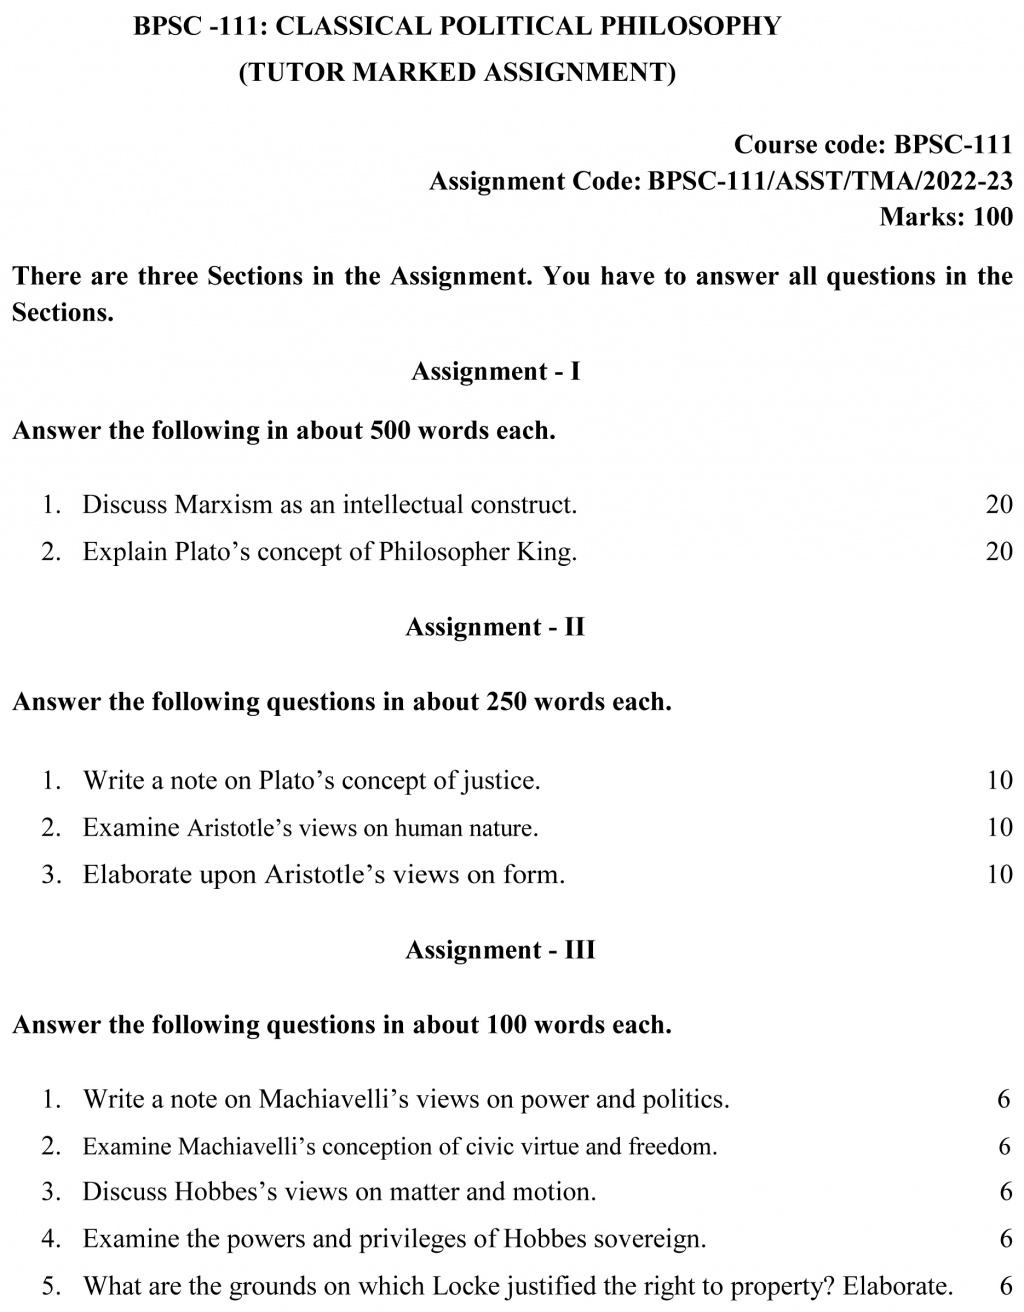 IGNOU BPSC-111 - Classical Political Philosophy, Latest Solved Assignment-July 2022 – January 2023